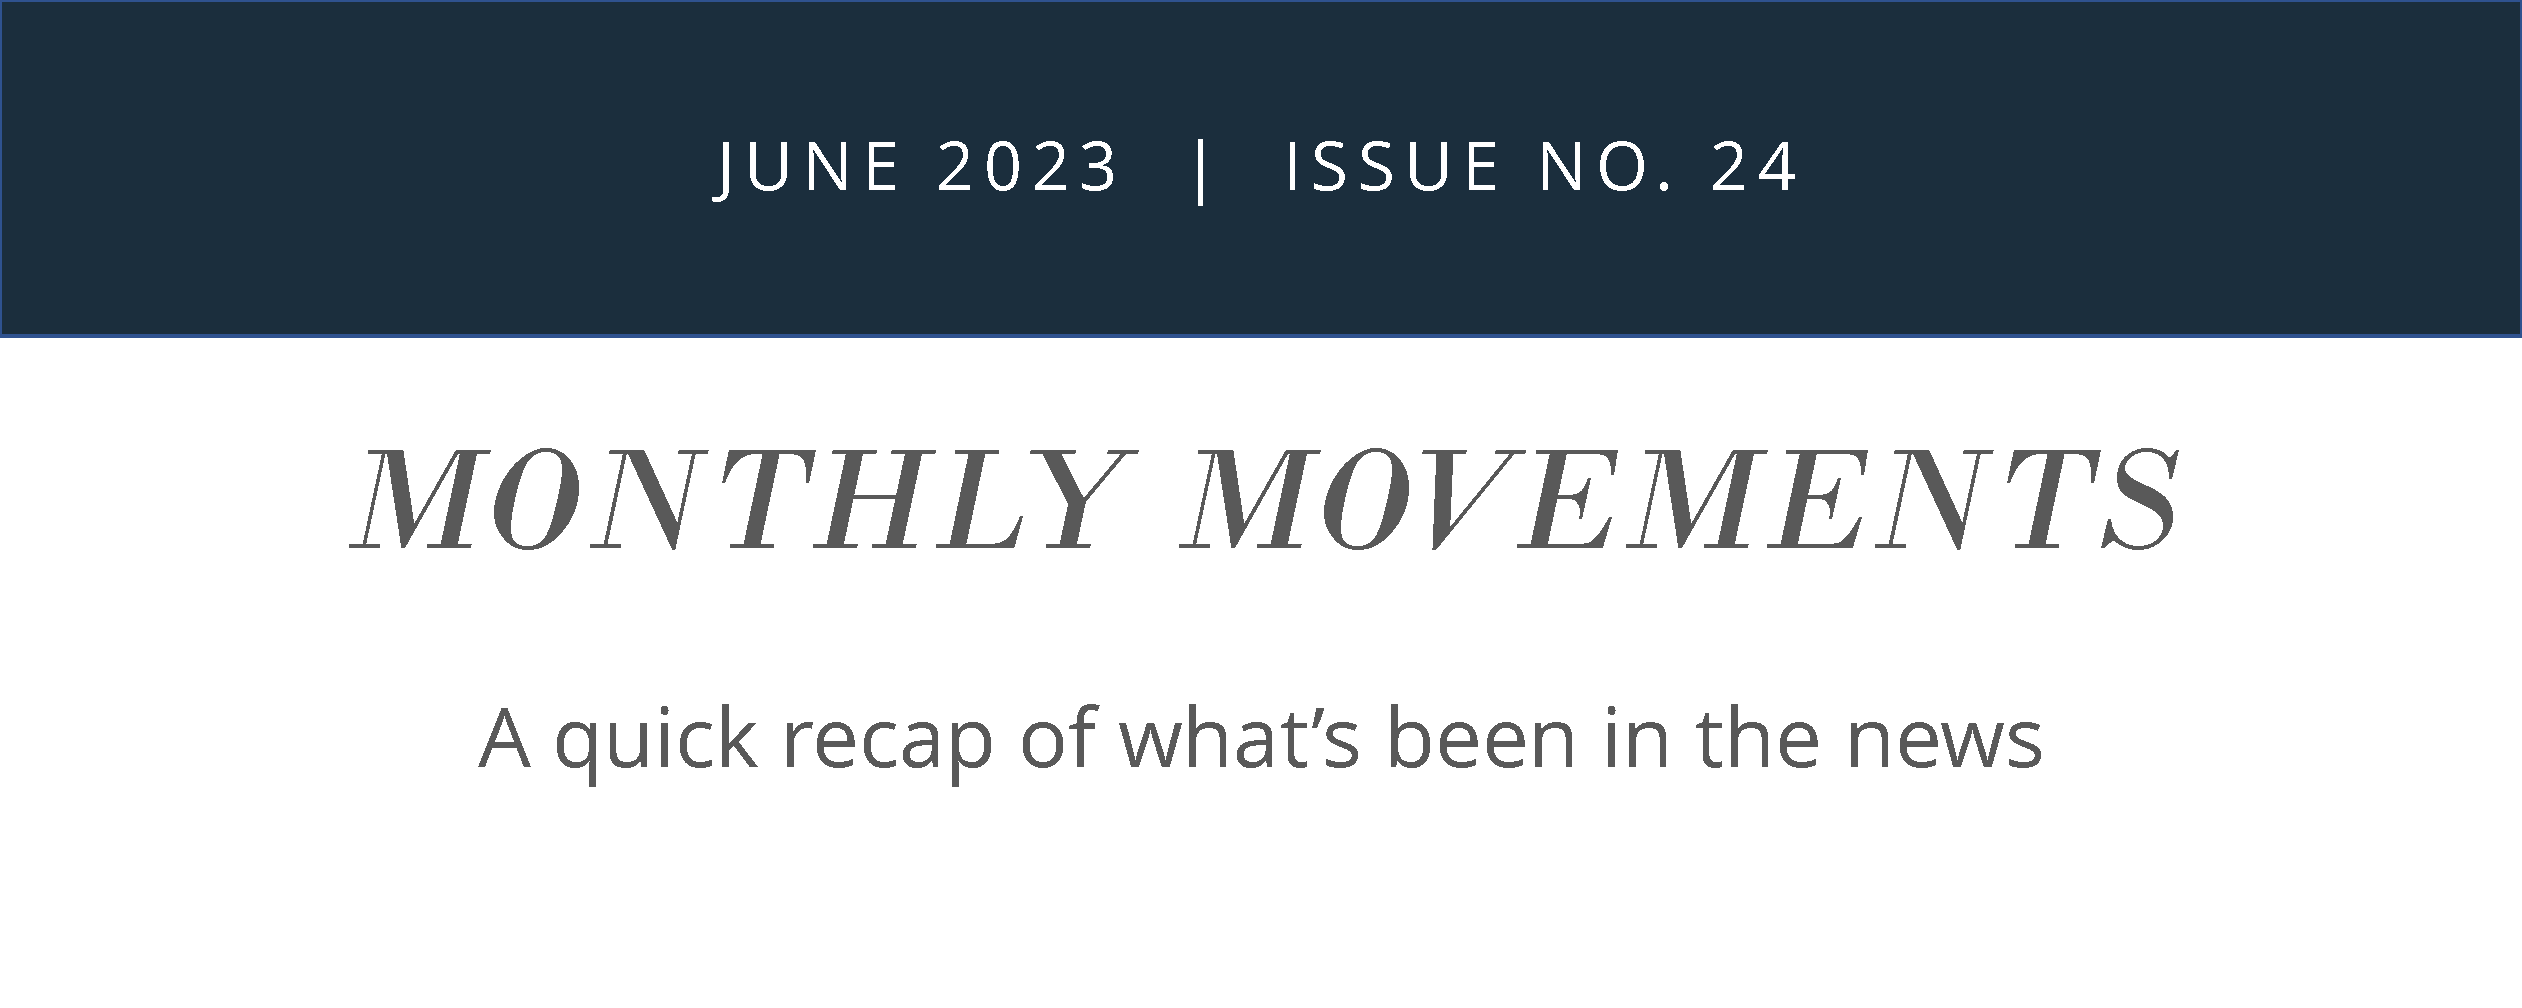 JUNE MONTHLY MOVEMENTS